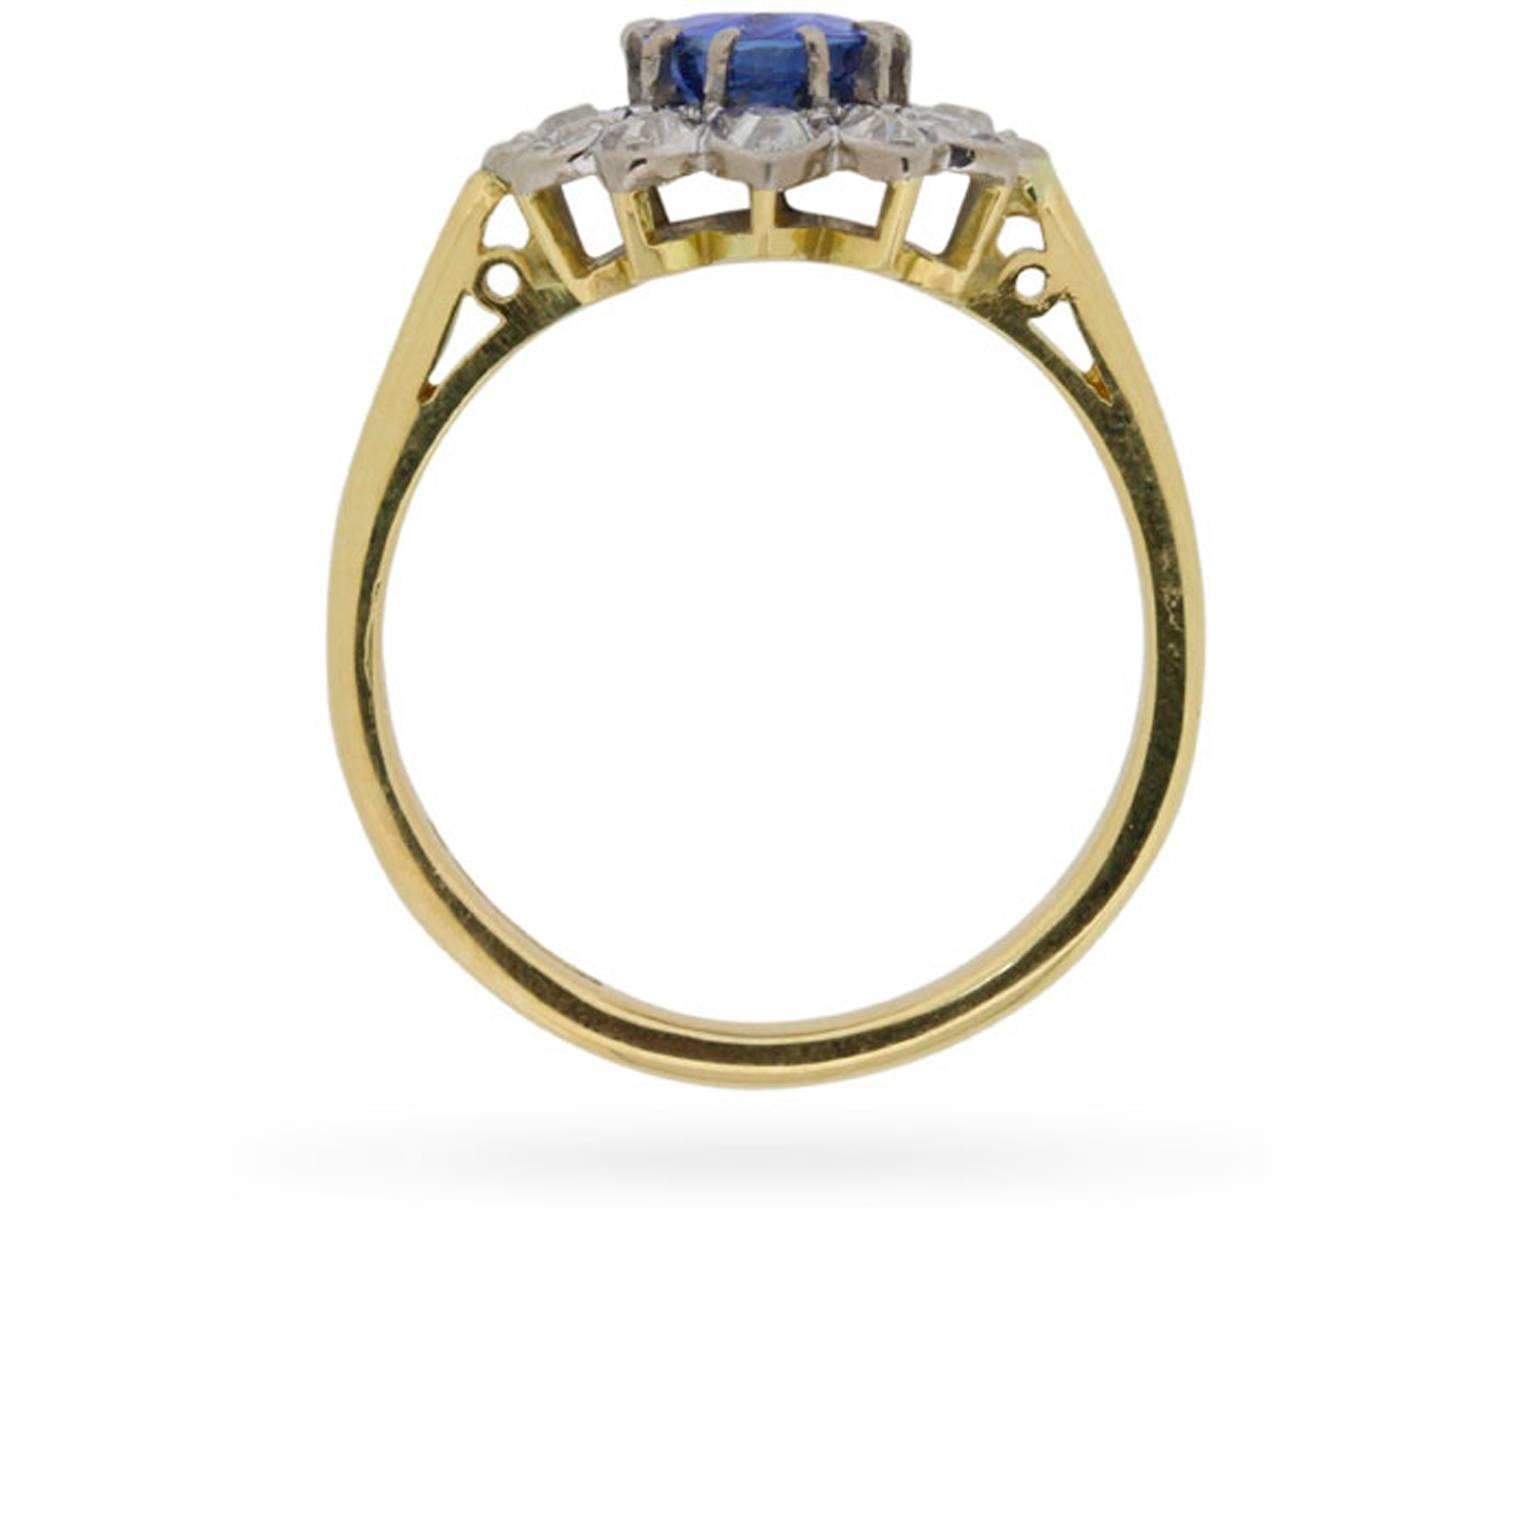 Flower cluster rings have been a perennial favourite since Victorian times, but this circa 1940s rendition is one of the prettiest and most unique examples that we’ve seen.

A bright blue, 1.50 carat, oval-shaped sapphire is the centre to twelve old